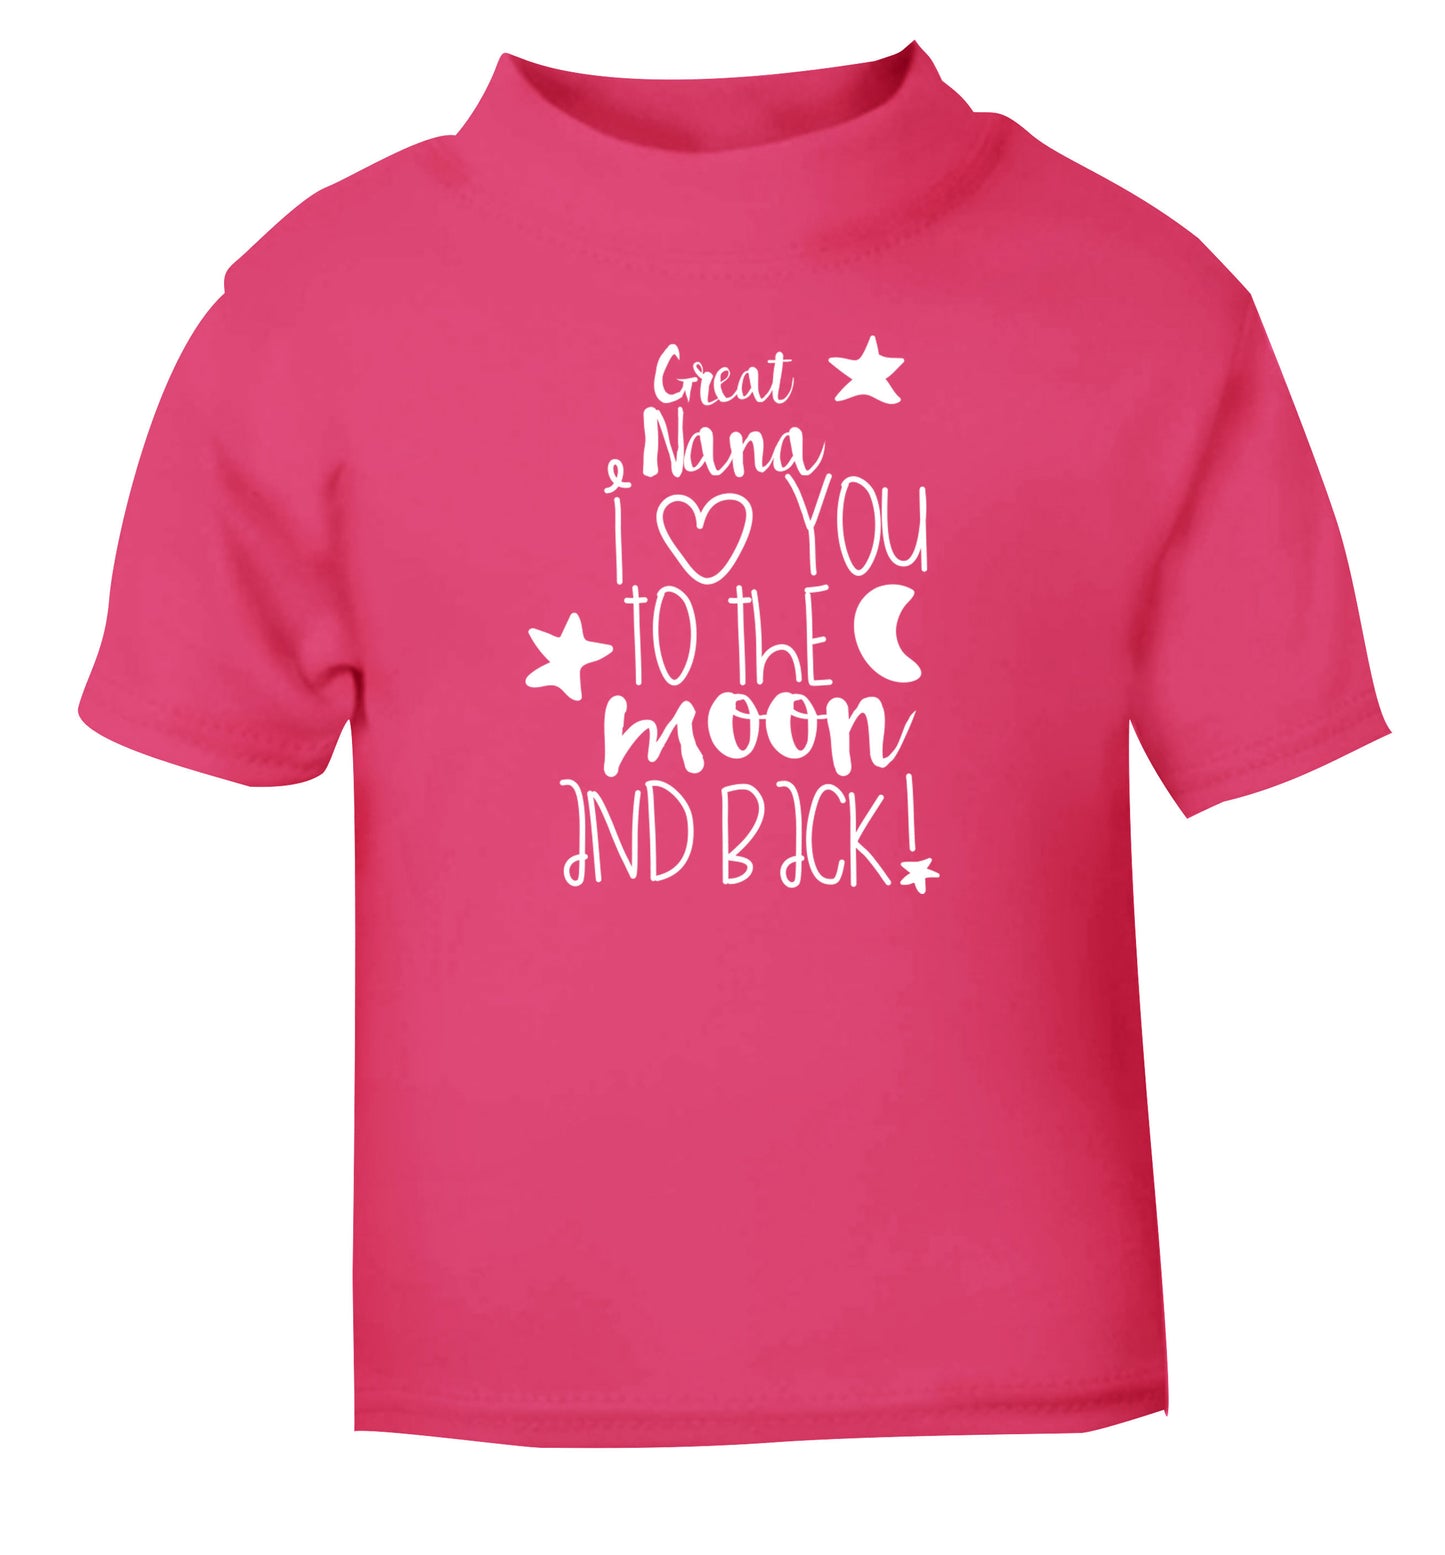 Great Nana I love you to the moon and back pink Baby Toddler Tshirt 2 Years